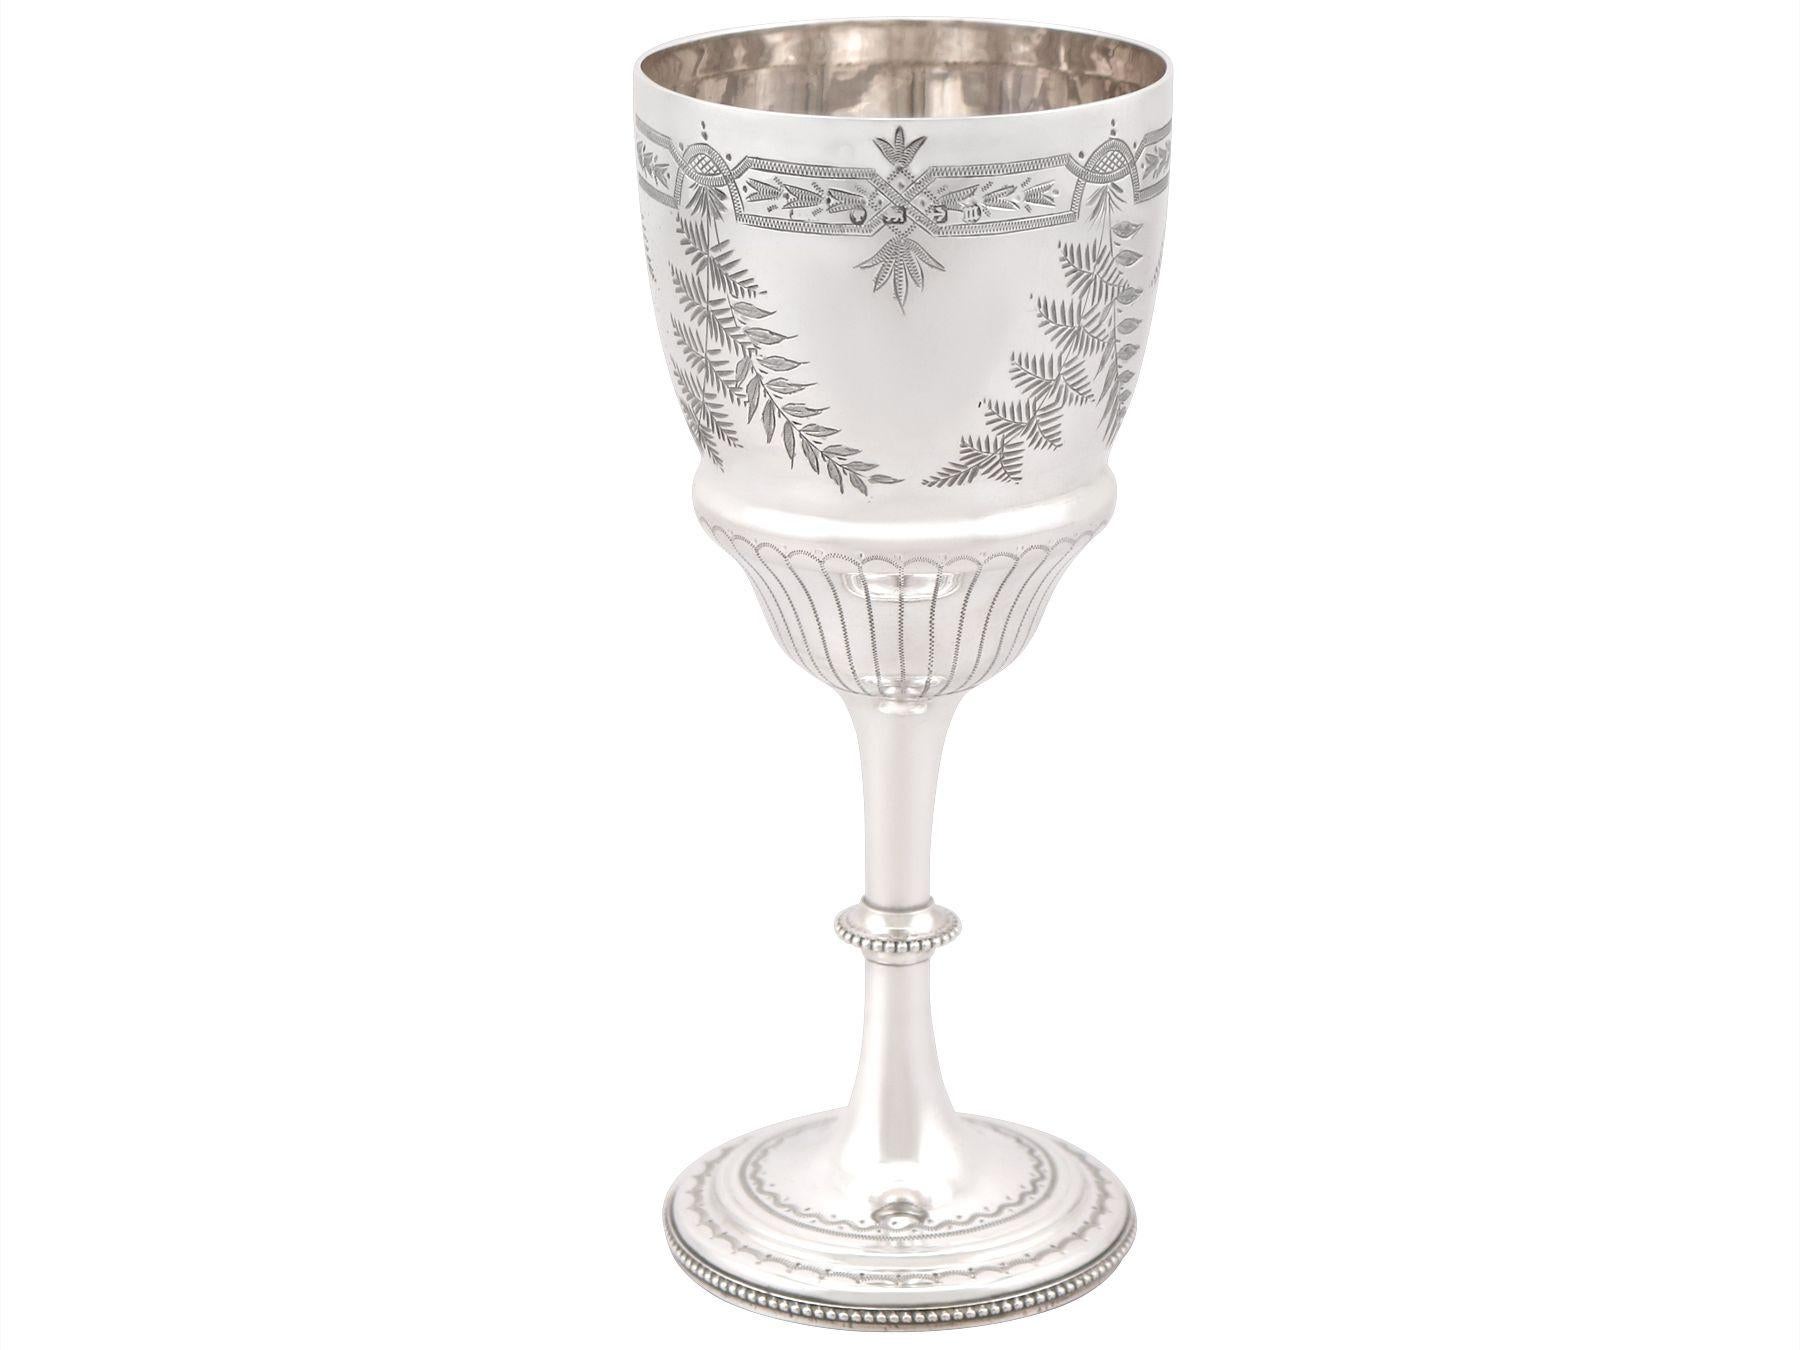 An exceptional, fine and impressive antique Victorian English sterling silver goblet - boxed; an addition to our collection of wine and drinks related silverware

This exceptional antique Victorian boxed sterling silver goblet has a circular bell